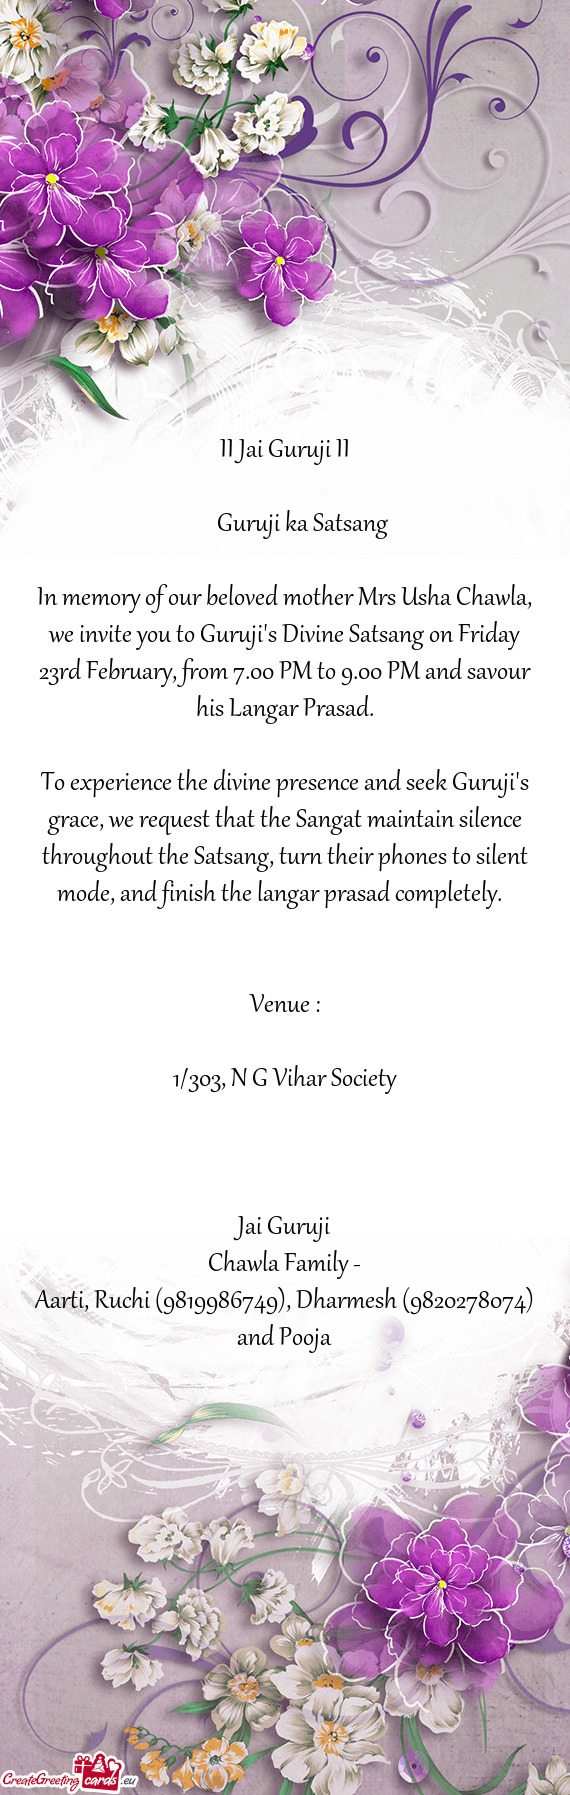 23rd February, from 7.00 PM to 9.00 PM and savour his Langar Prasad